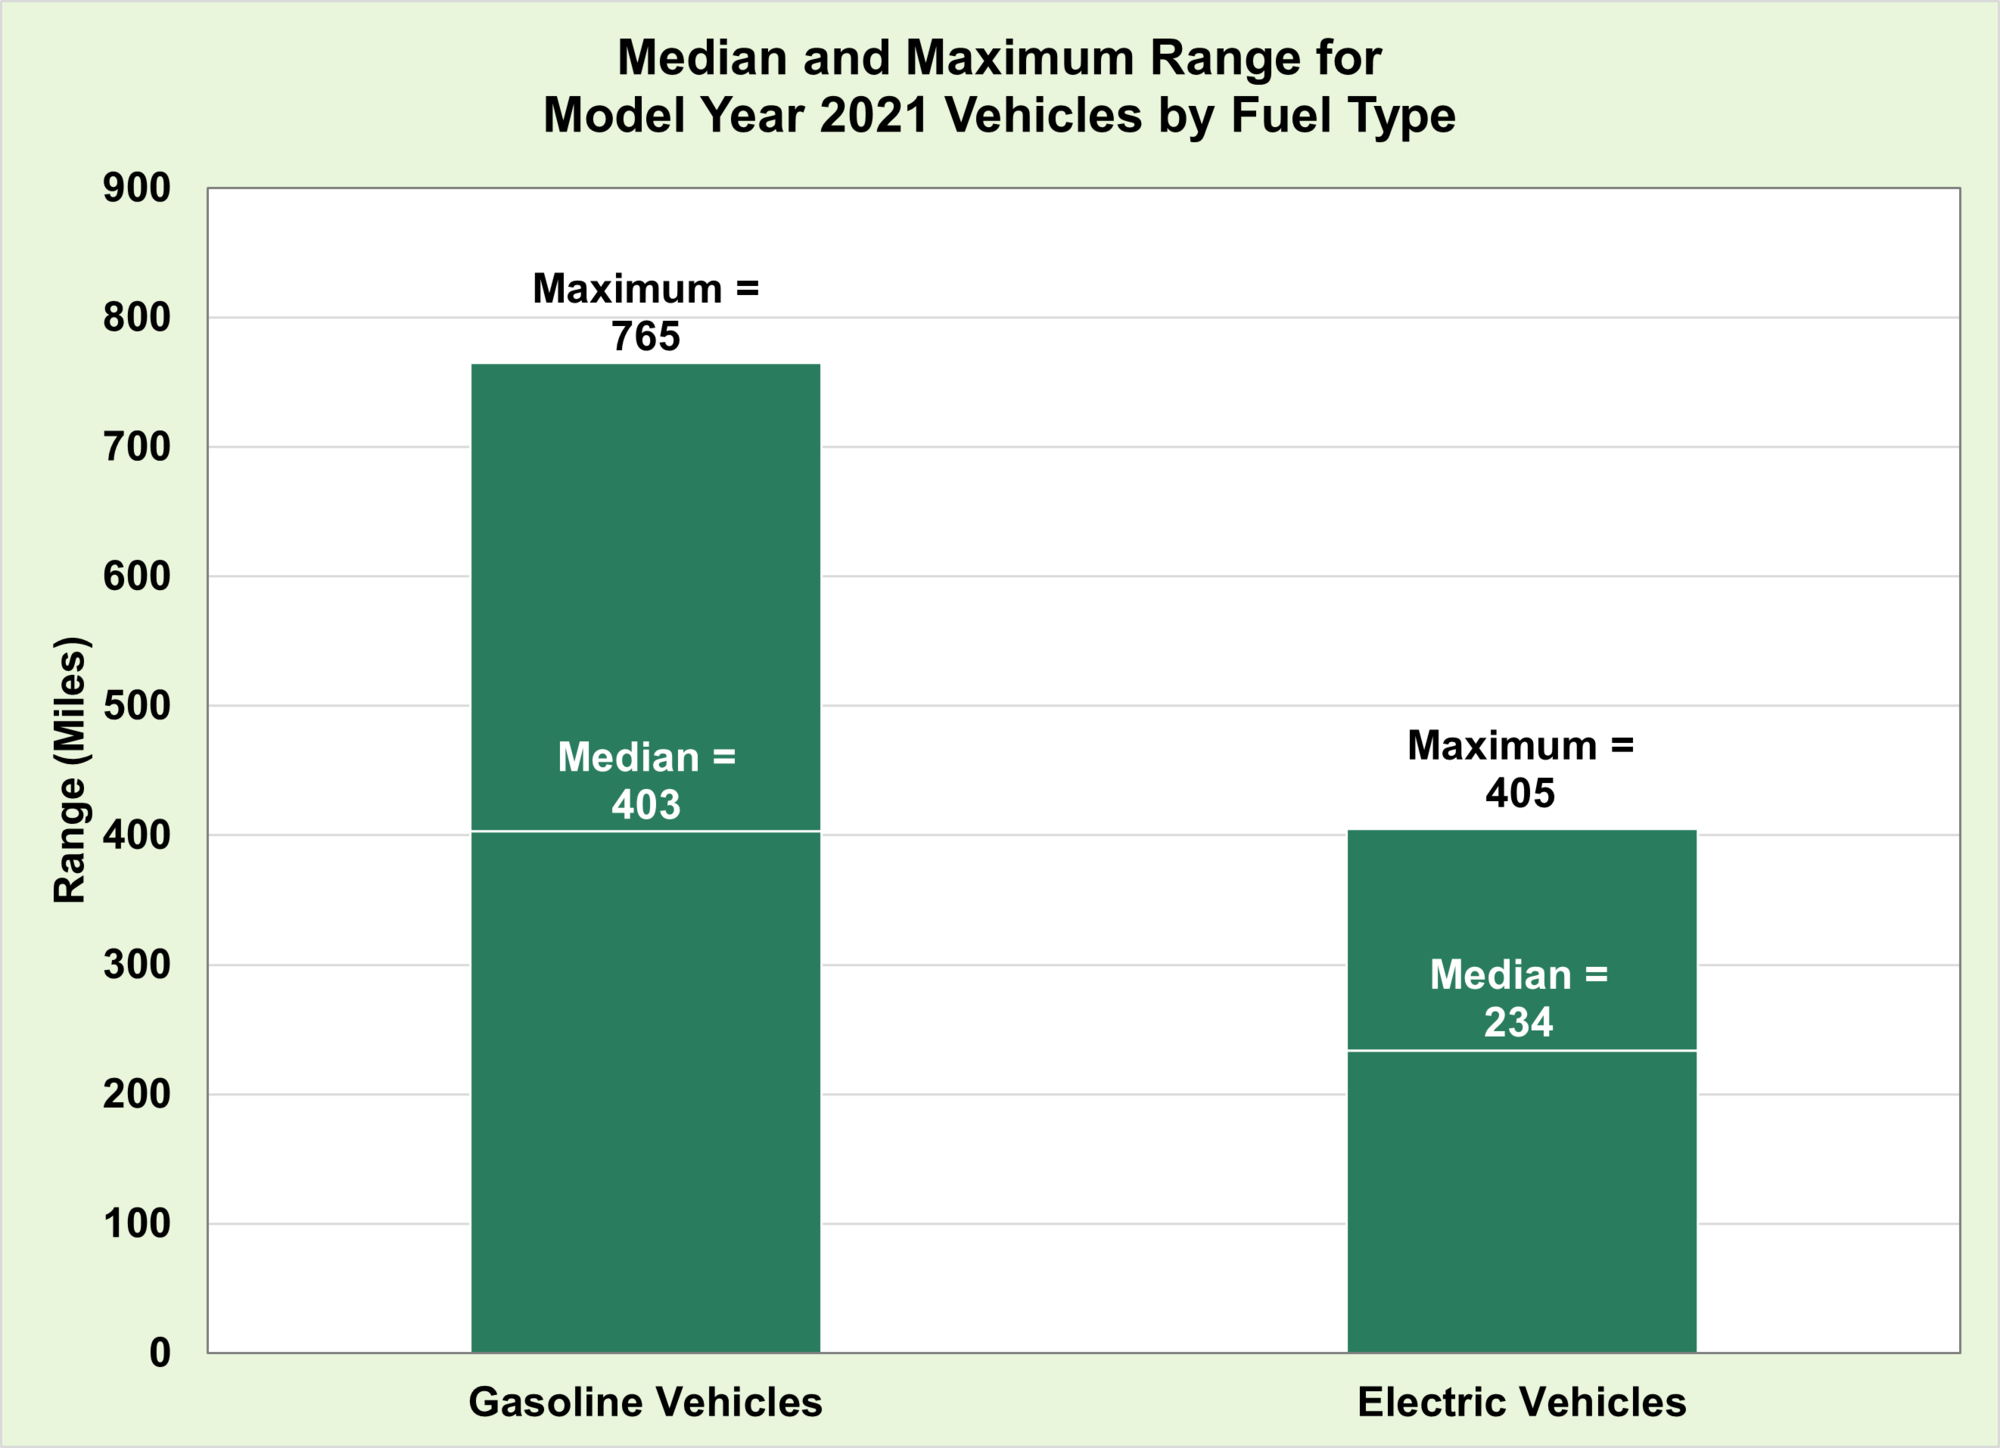 Median and Maximum Range for Model Year 2021 Vehicles by Fuel Type